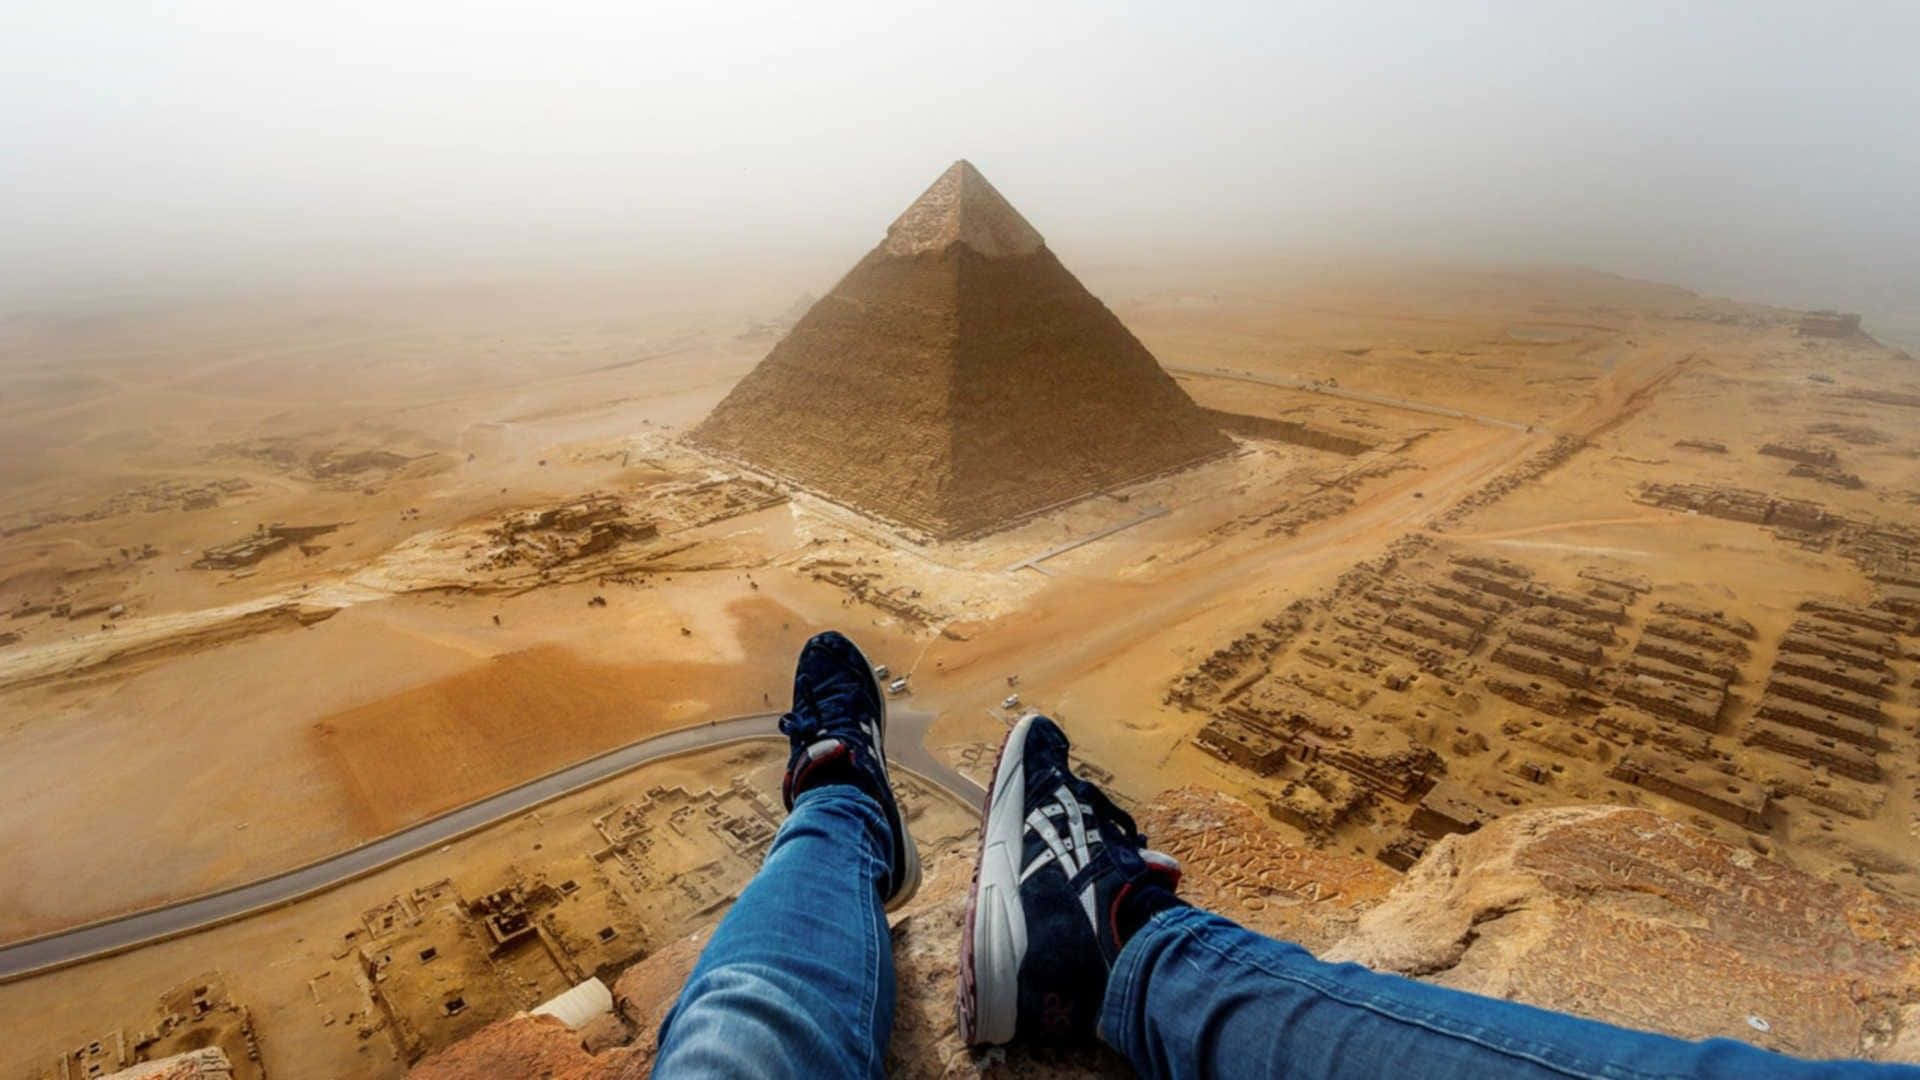 Breathtaking view of the Pyramids and the Sphinx in Egypt